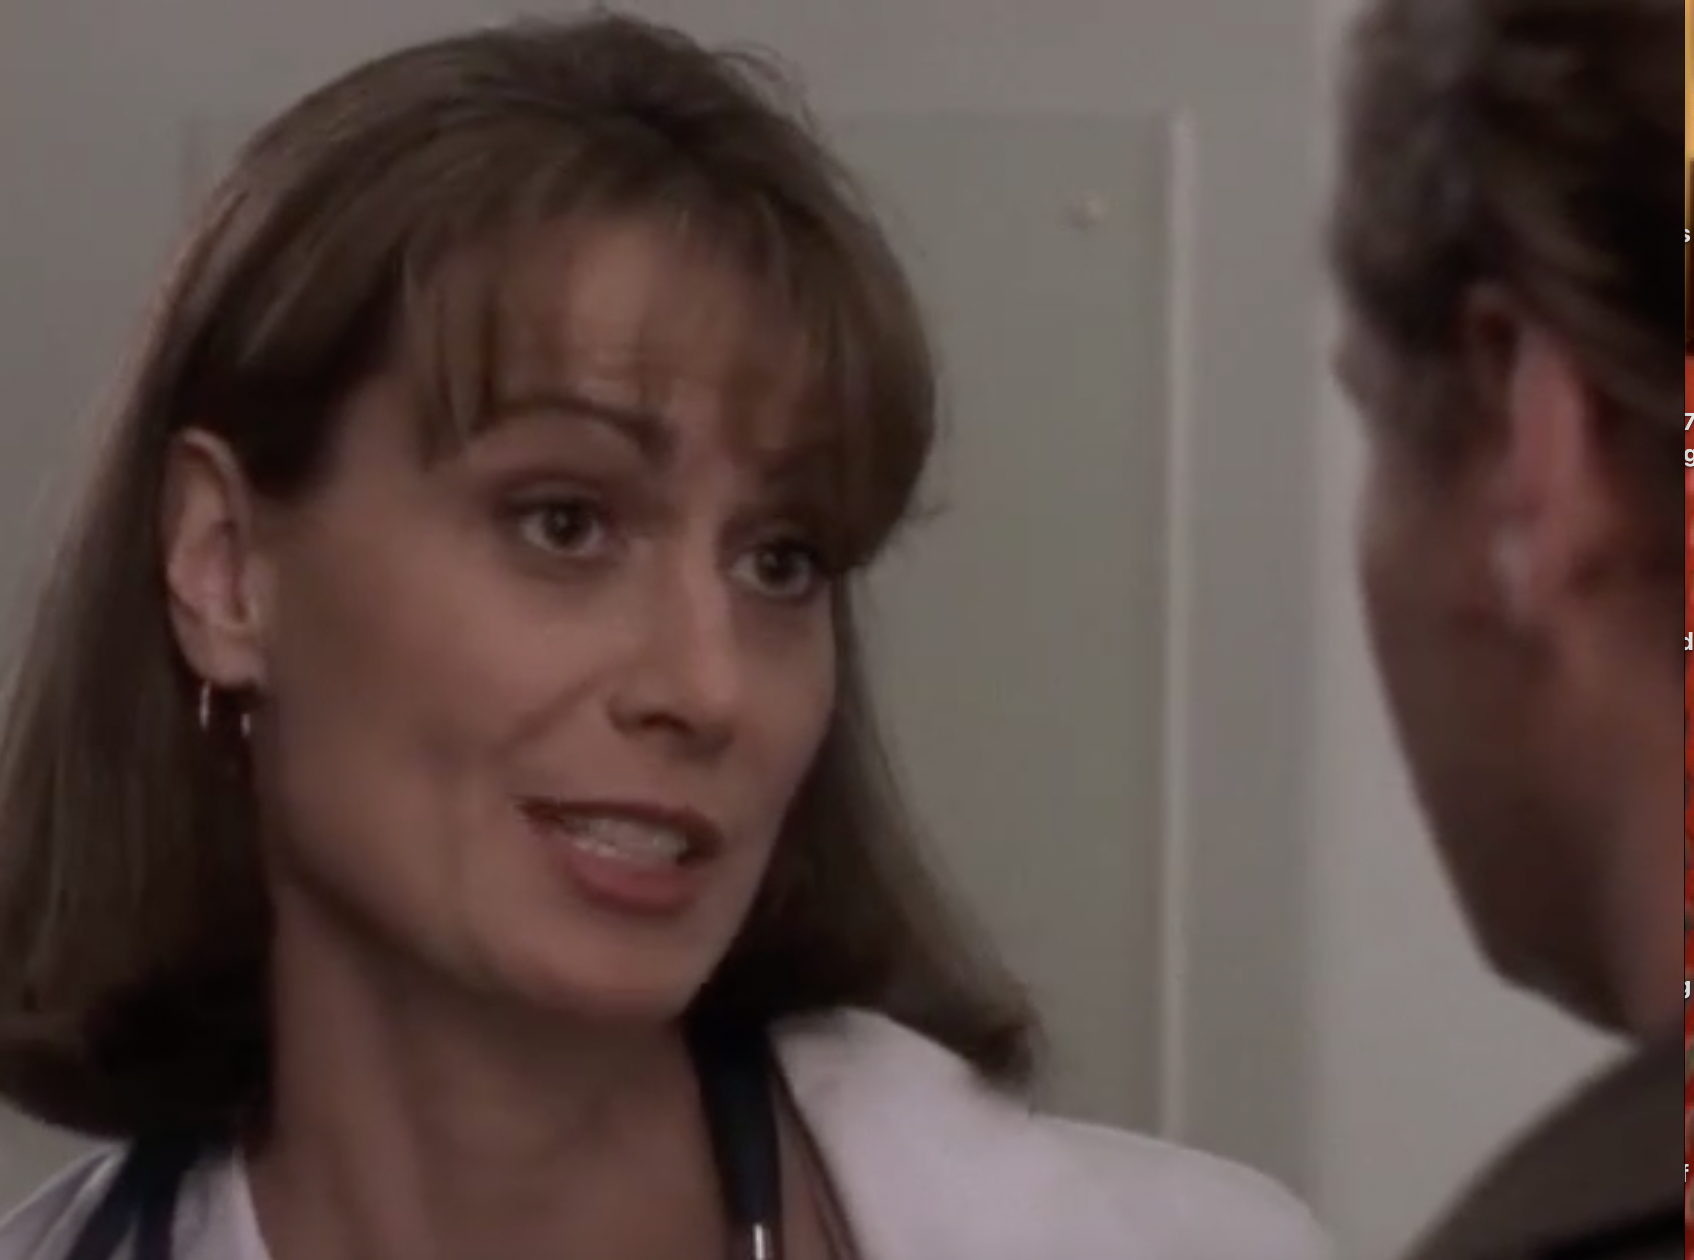 Dr. Christina Markham (Mel Harris) in a white coat with a stephoscope around her neck.